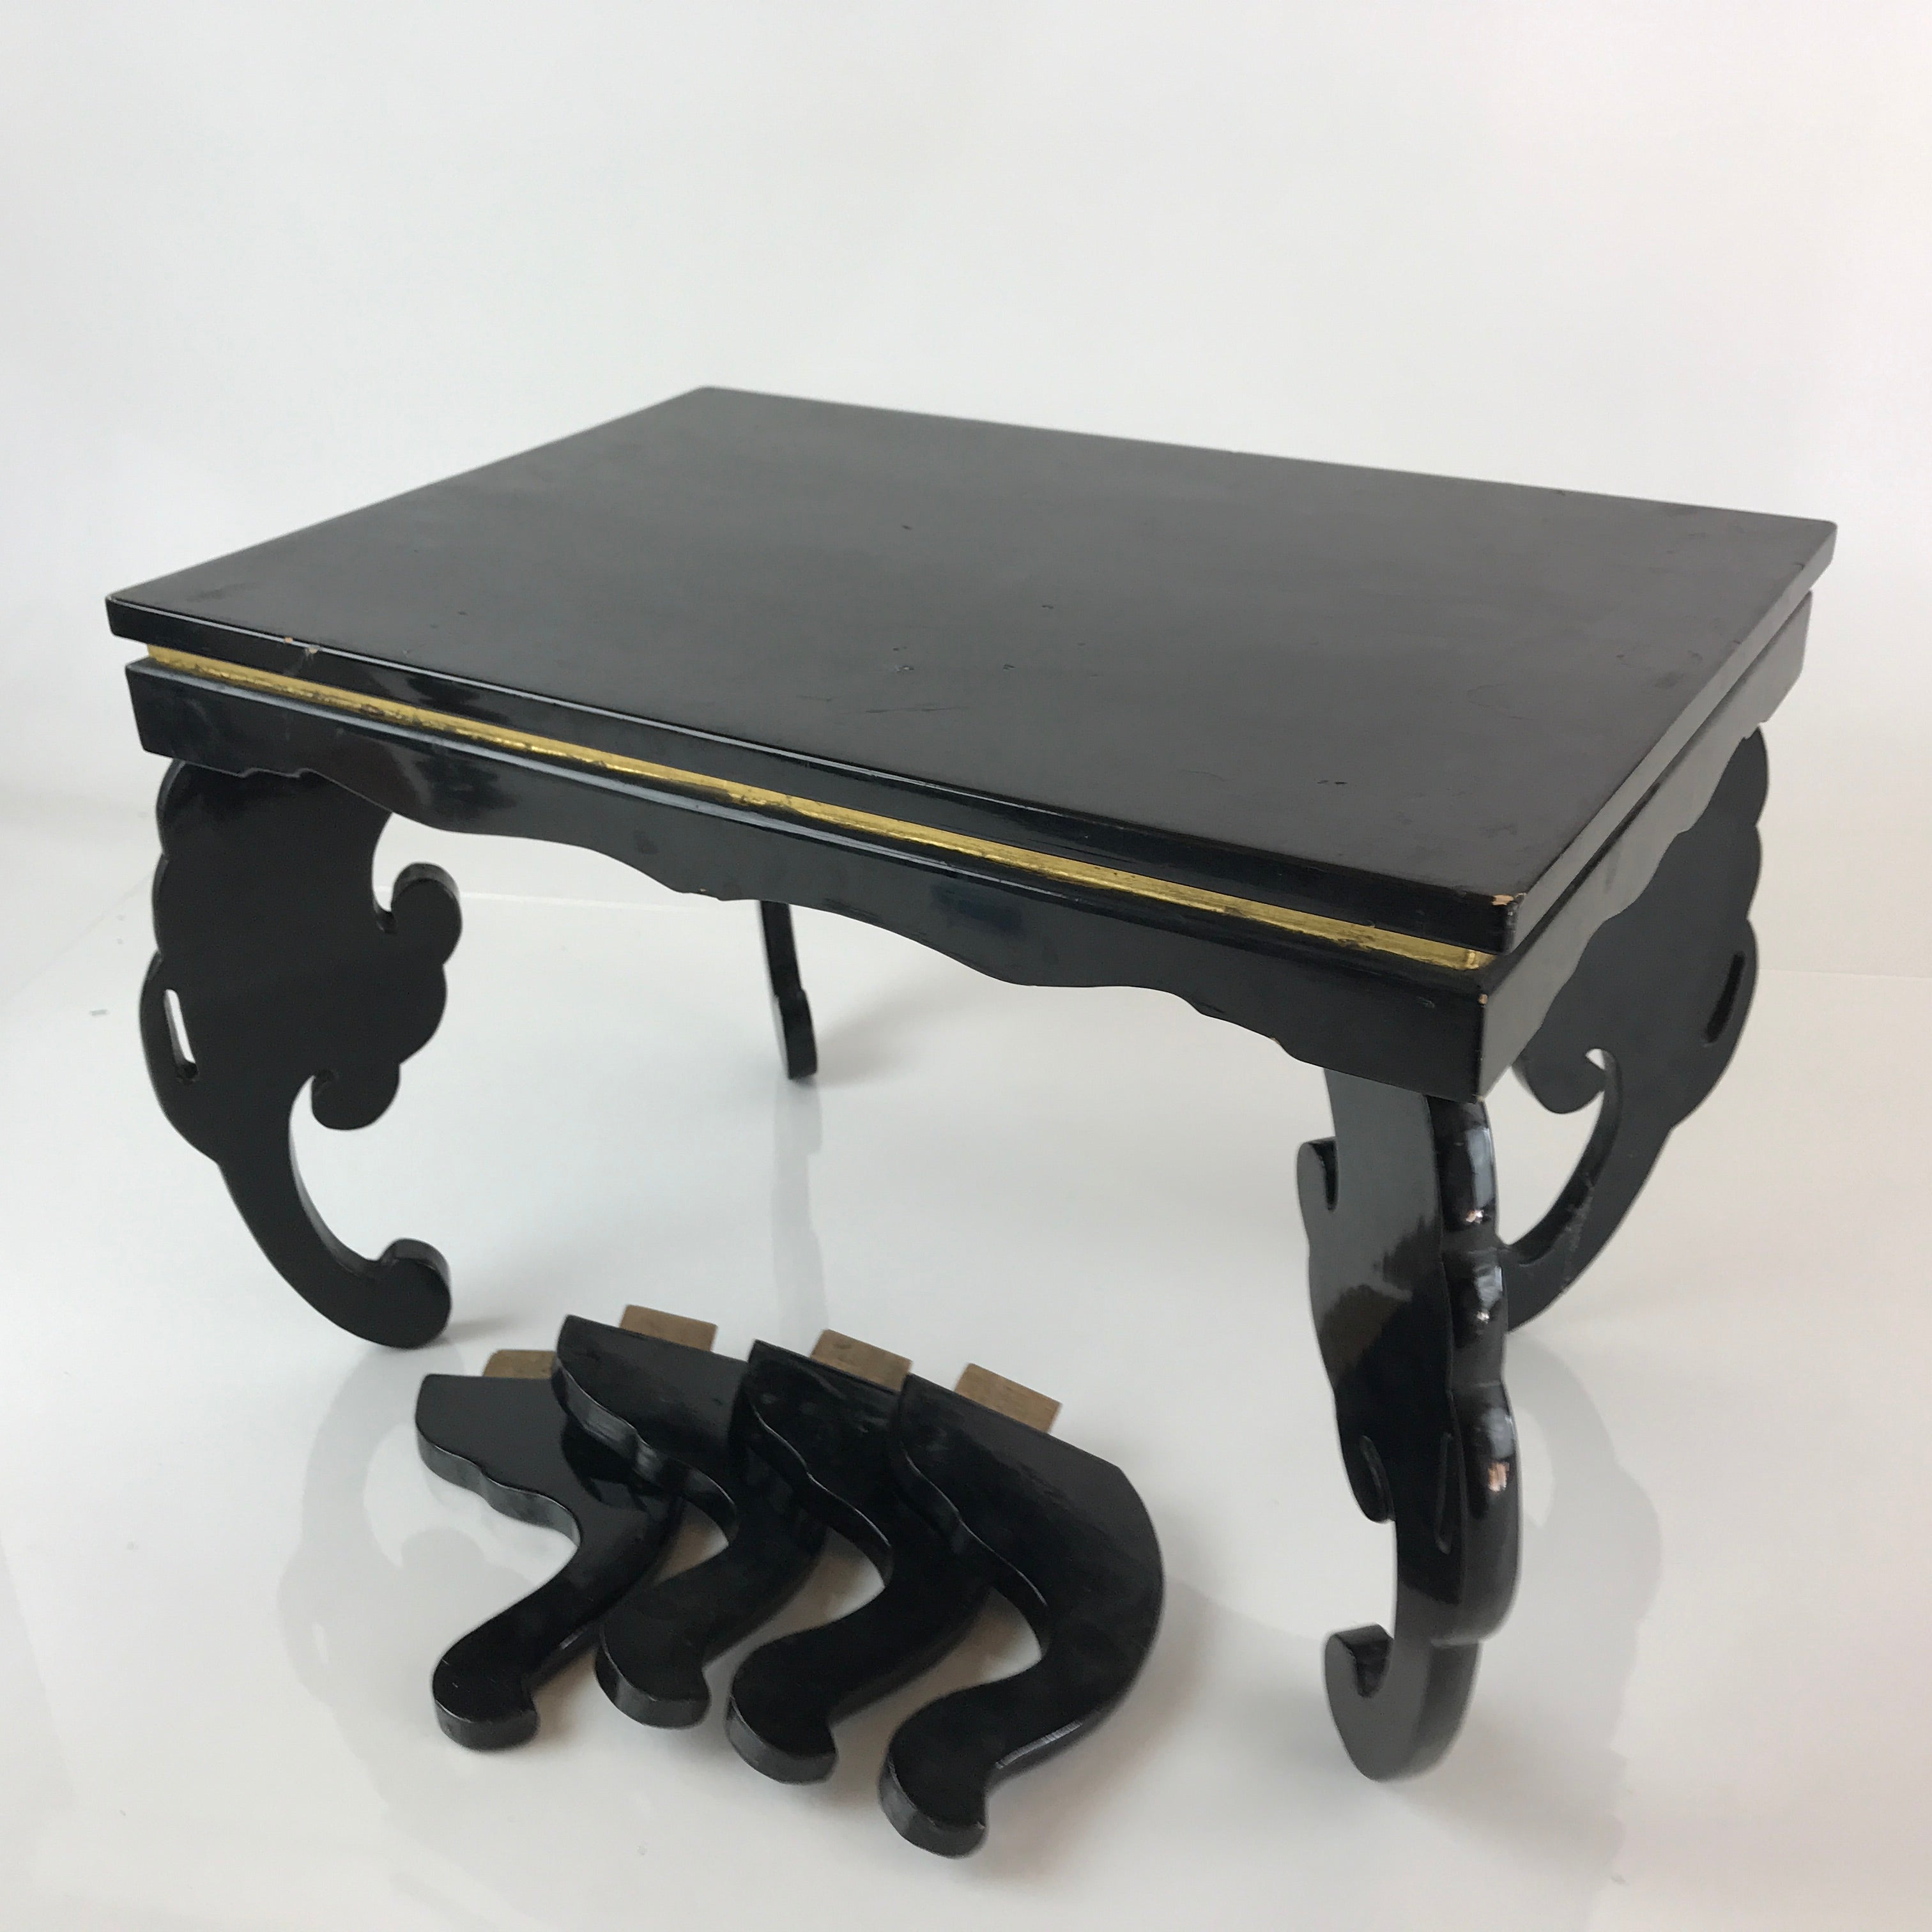 Antique Japanese Wooden Legged Tray Ozen Lacquered Black Table UR805